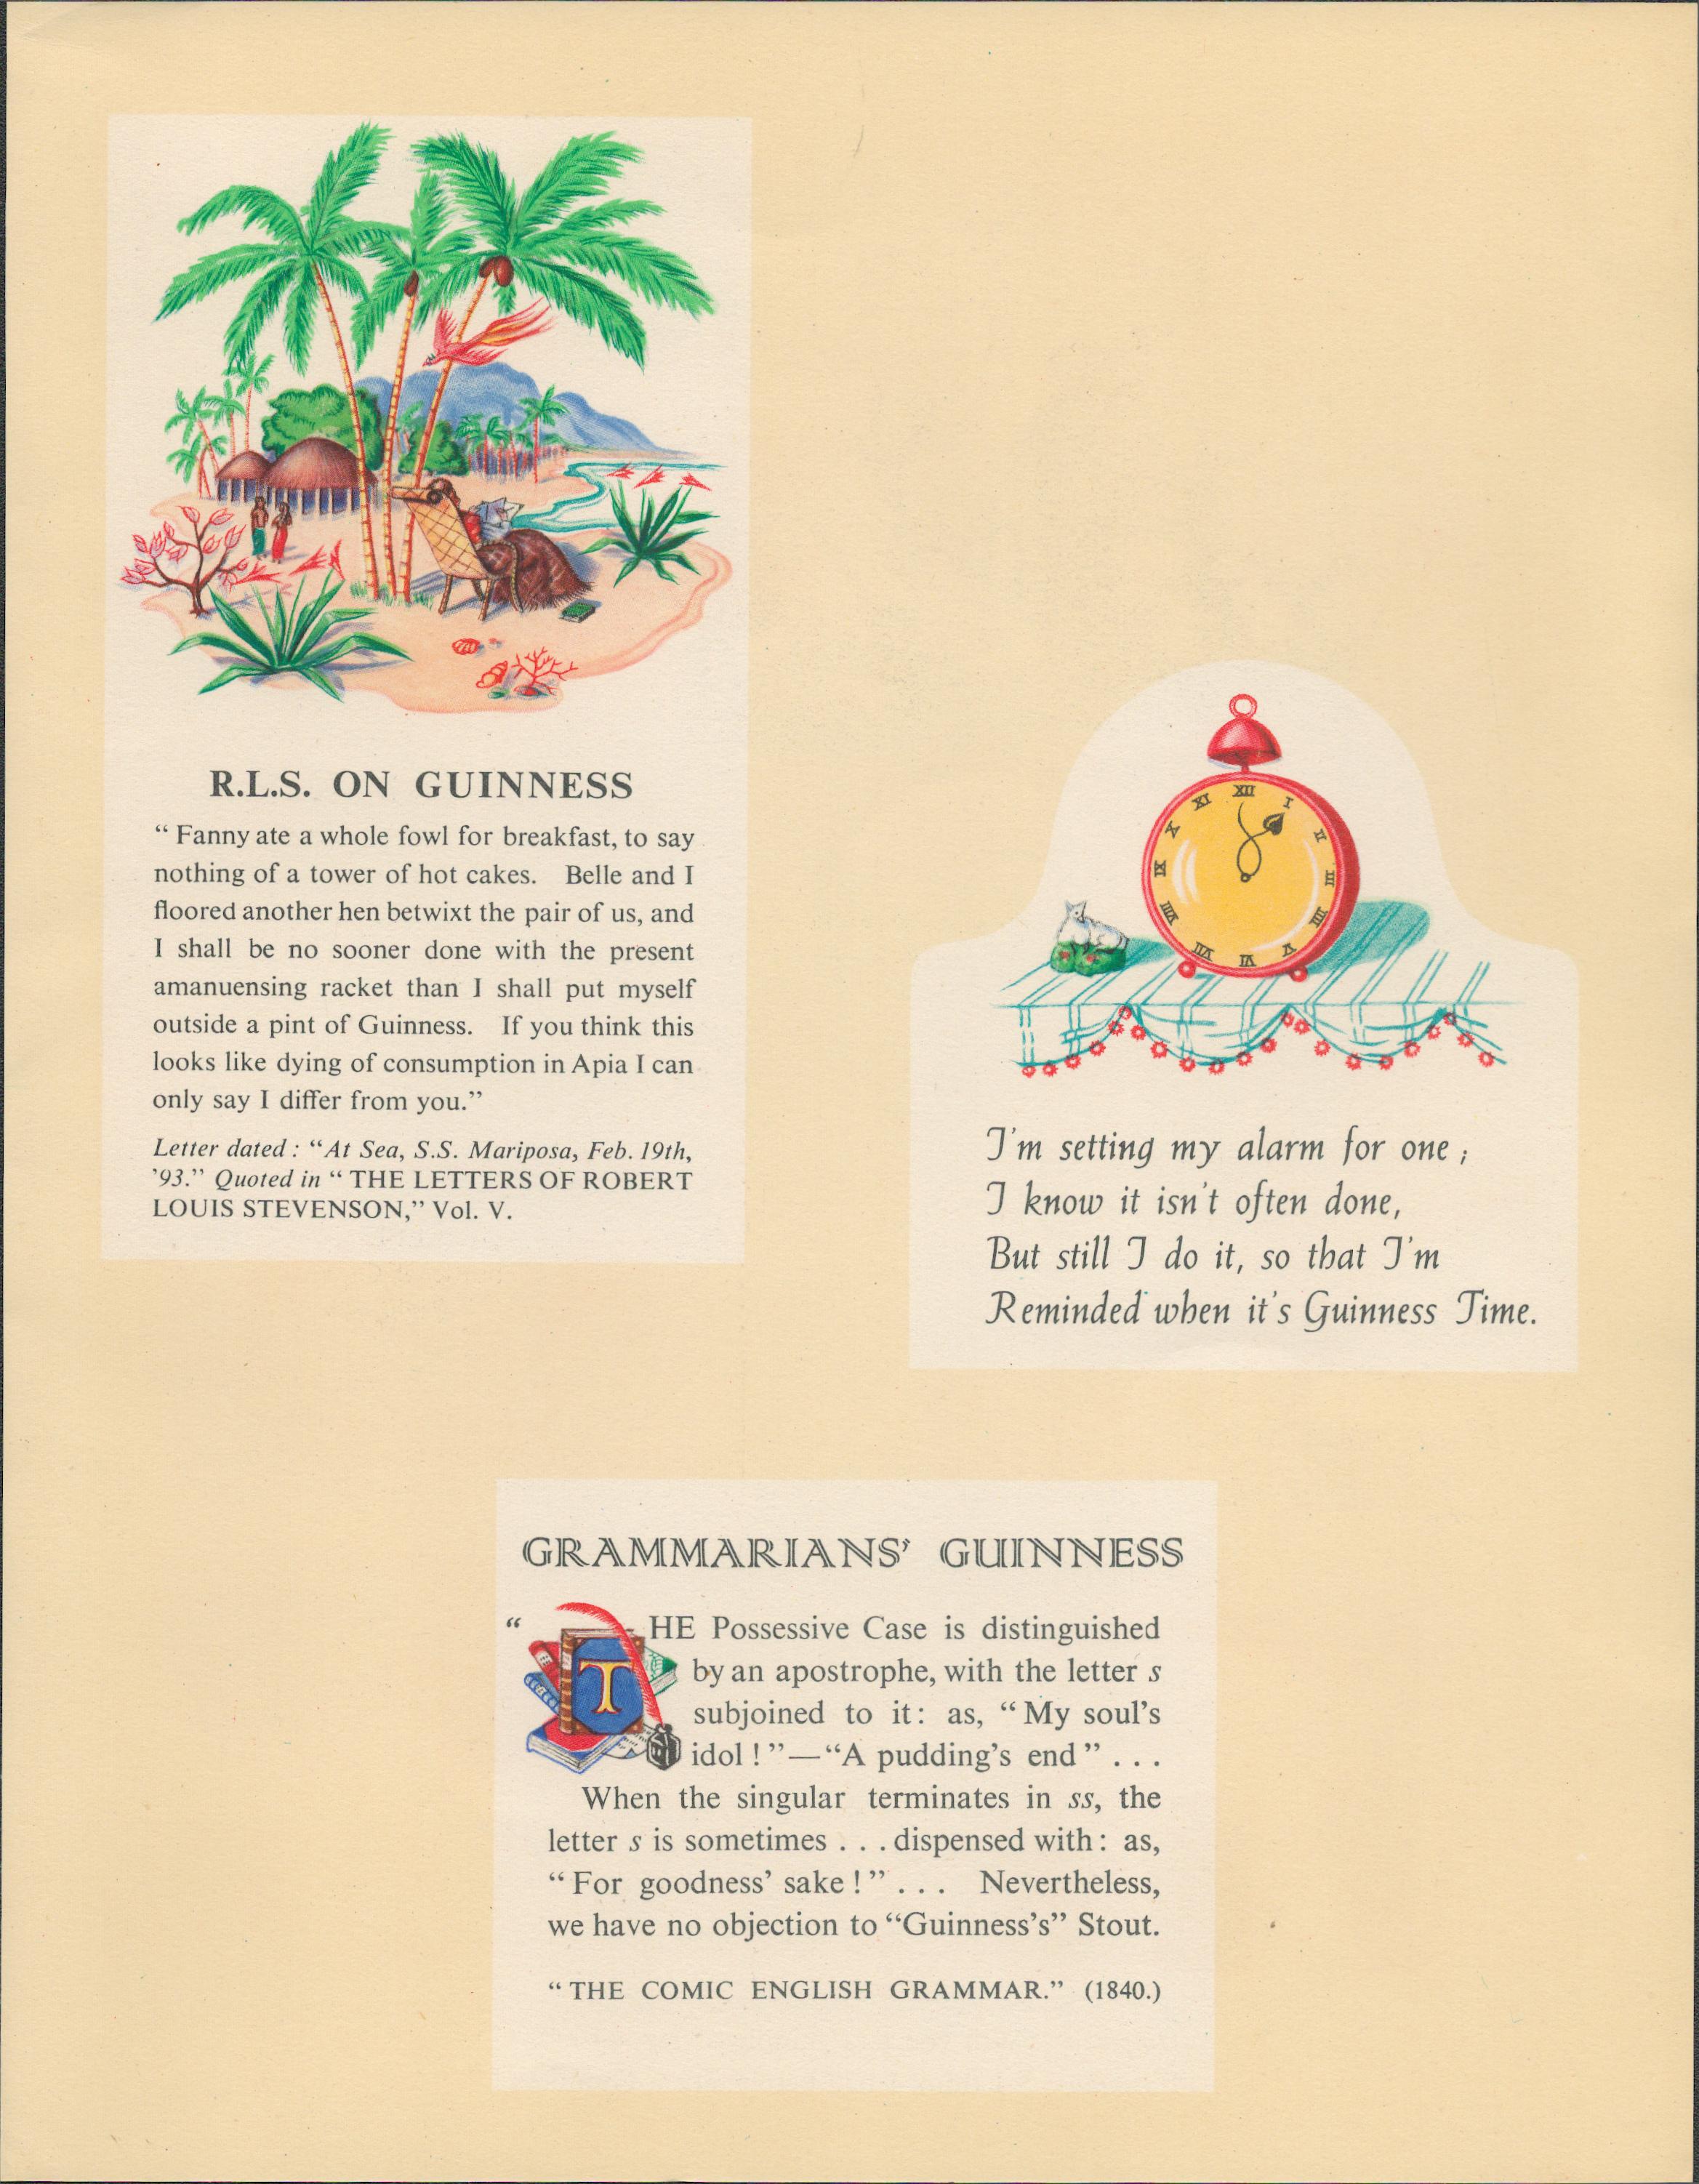 Guinness Print 1937 The Toucan & Guinness Time - Image 2 of 2